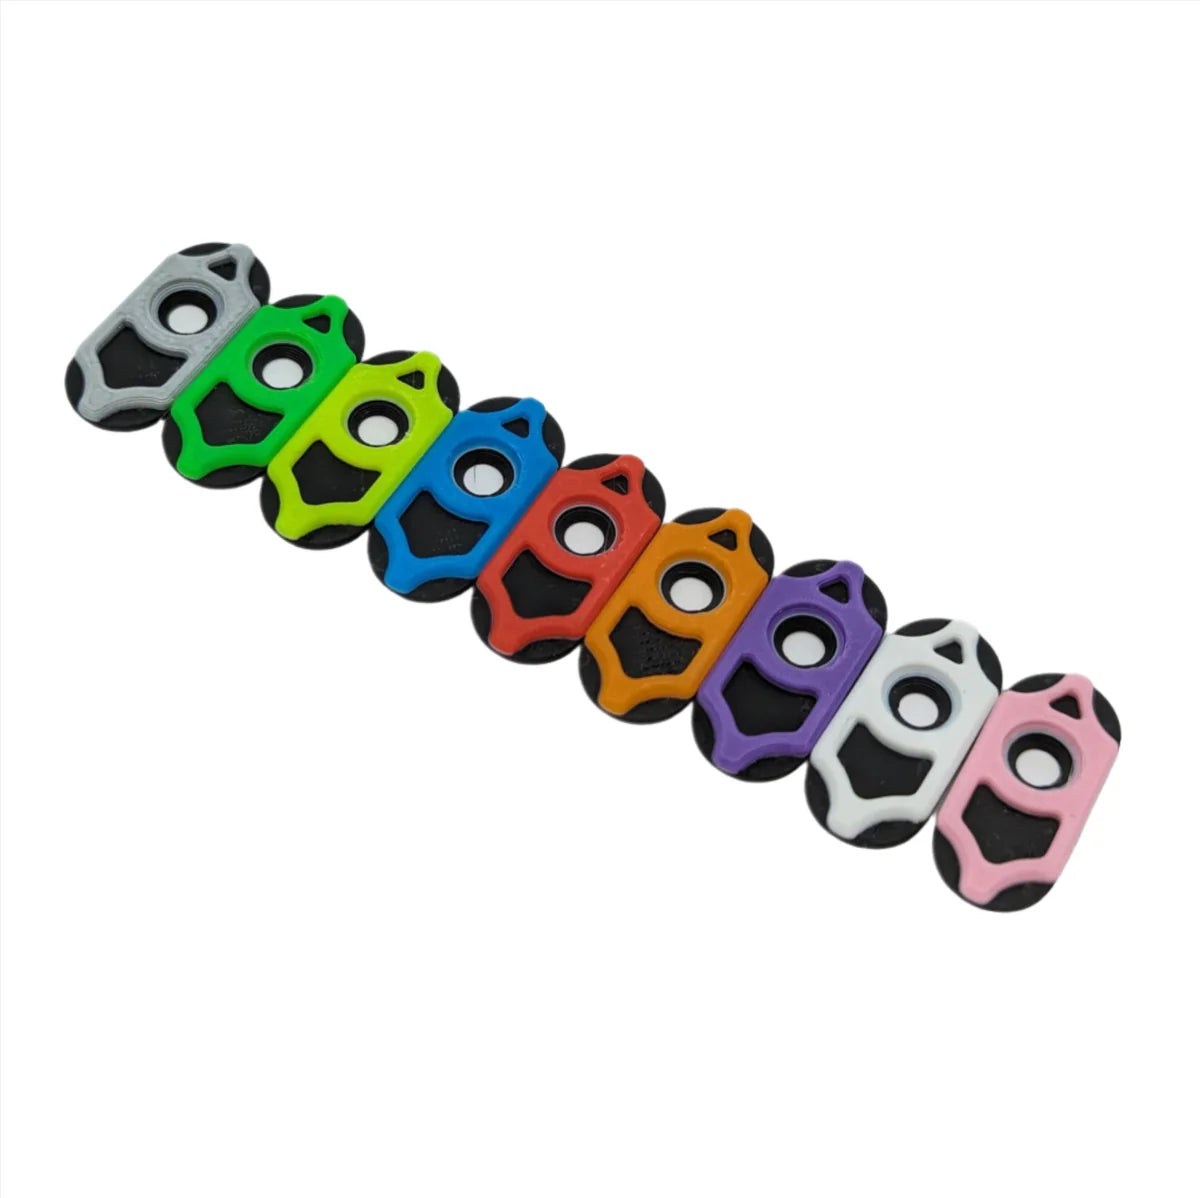 RC MAKER 3D Pro Wing Buttons for 1/10 TC